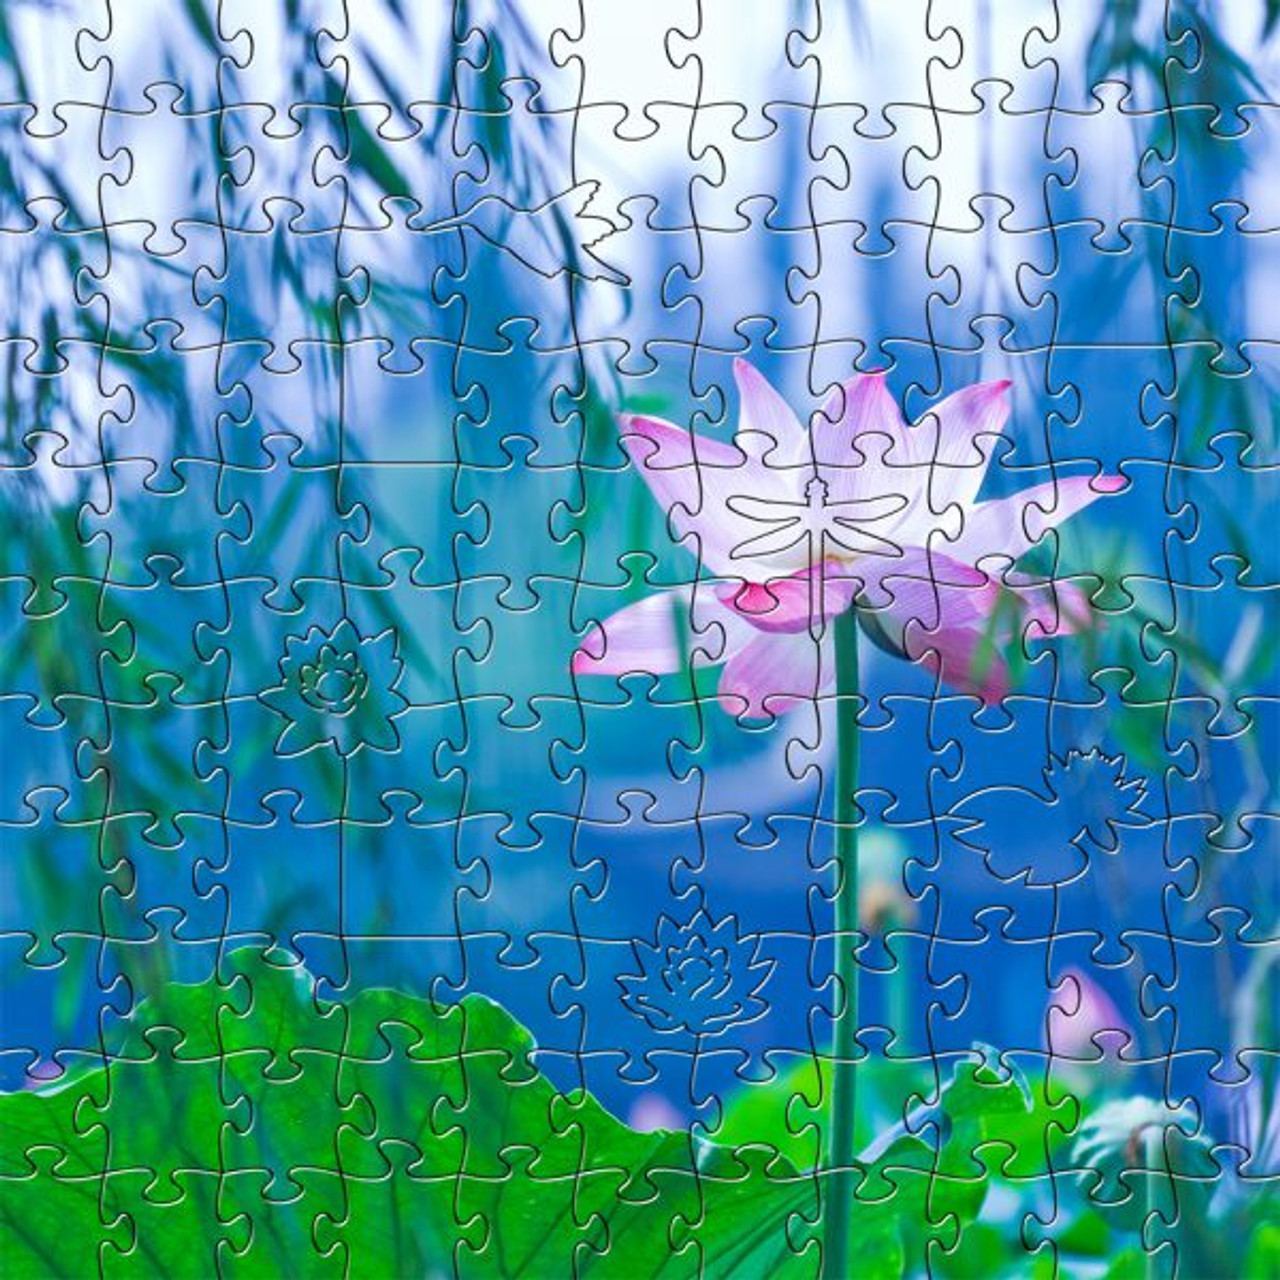 Waterlily 125 Piece Small Size Wooden Jigsaw Puzzle | Zen Puzzles